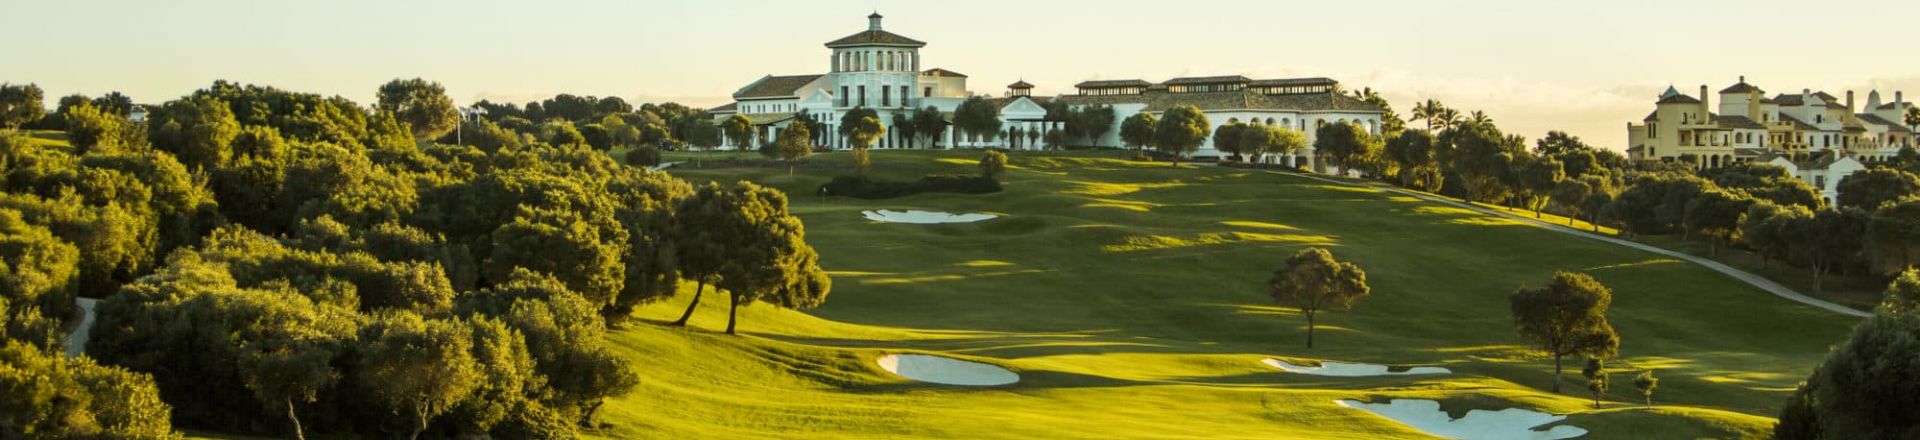 Golf Holidays in Spain at La Reserva golf course